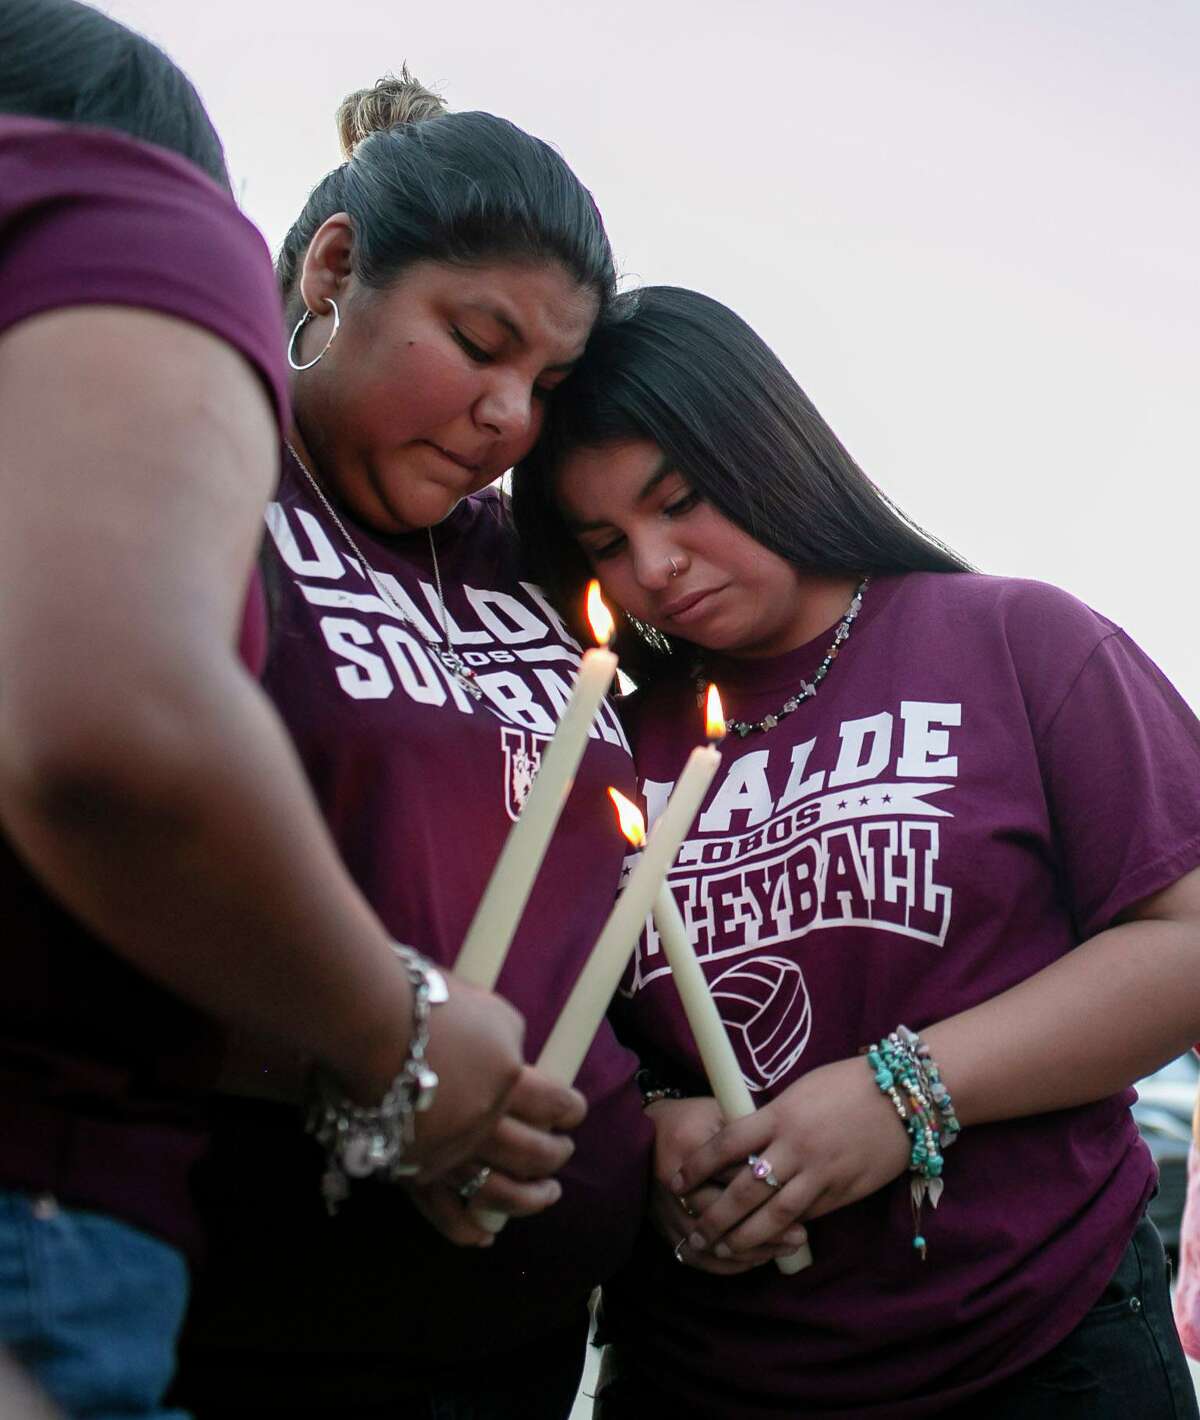 People comfort each other following a vigil held at the Uvalde County Fairplex Arena in Uvalde, Texas, Wednesday, May 25, 2022. (Josie Norris/The San Antonio Express-News via AP)